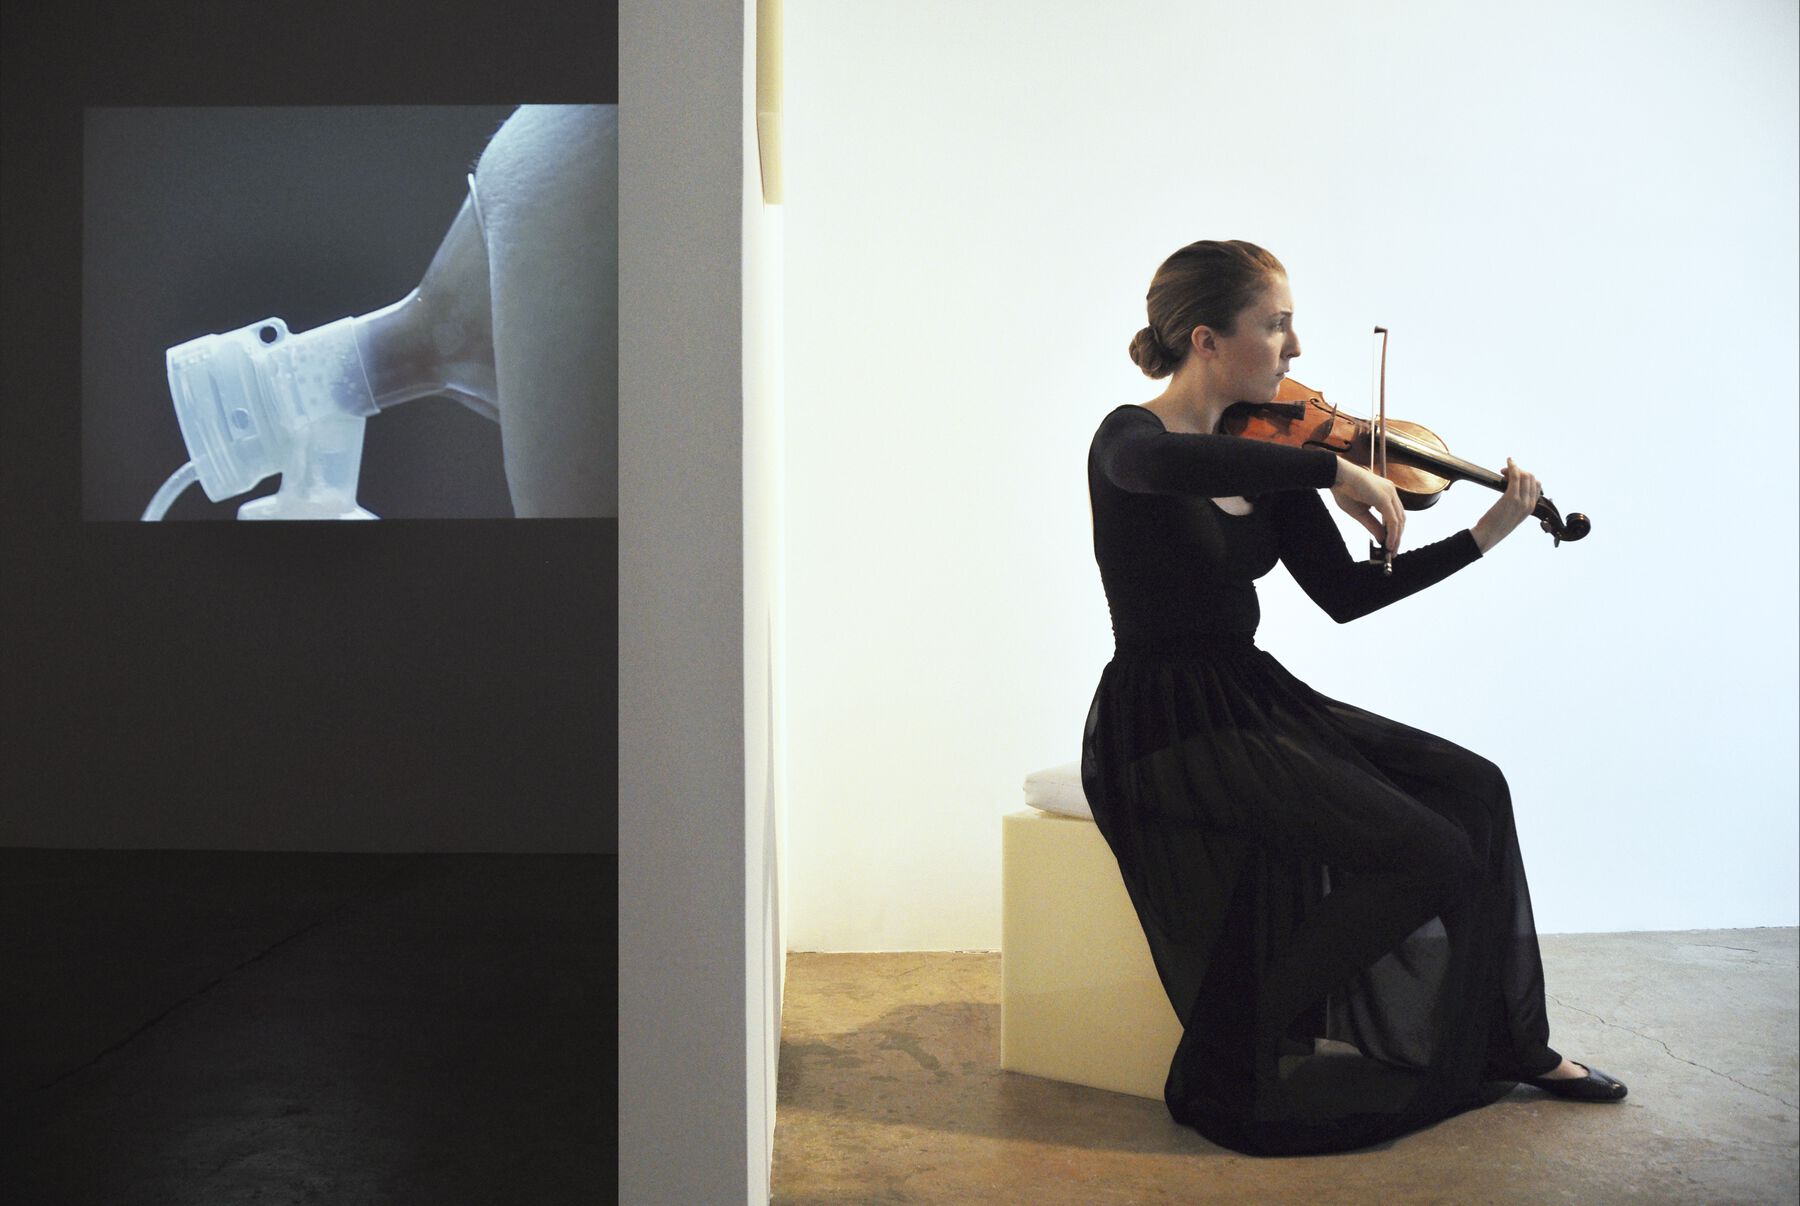 Projection of side closeup of breast being pumped (left) and musician in black dress playing violin (right) are partitioned by gallery wall